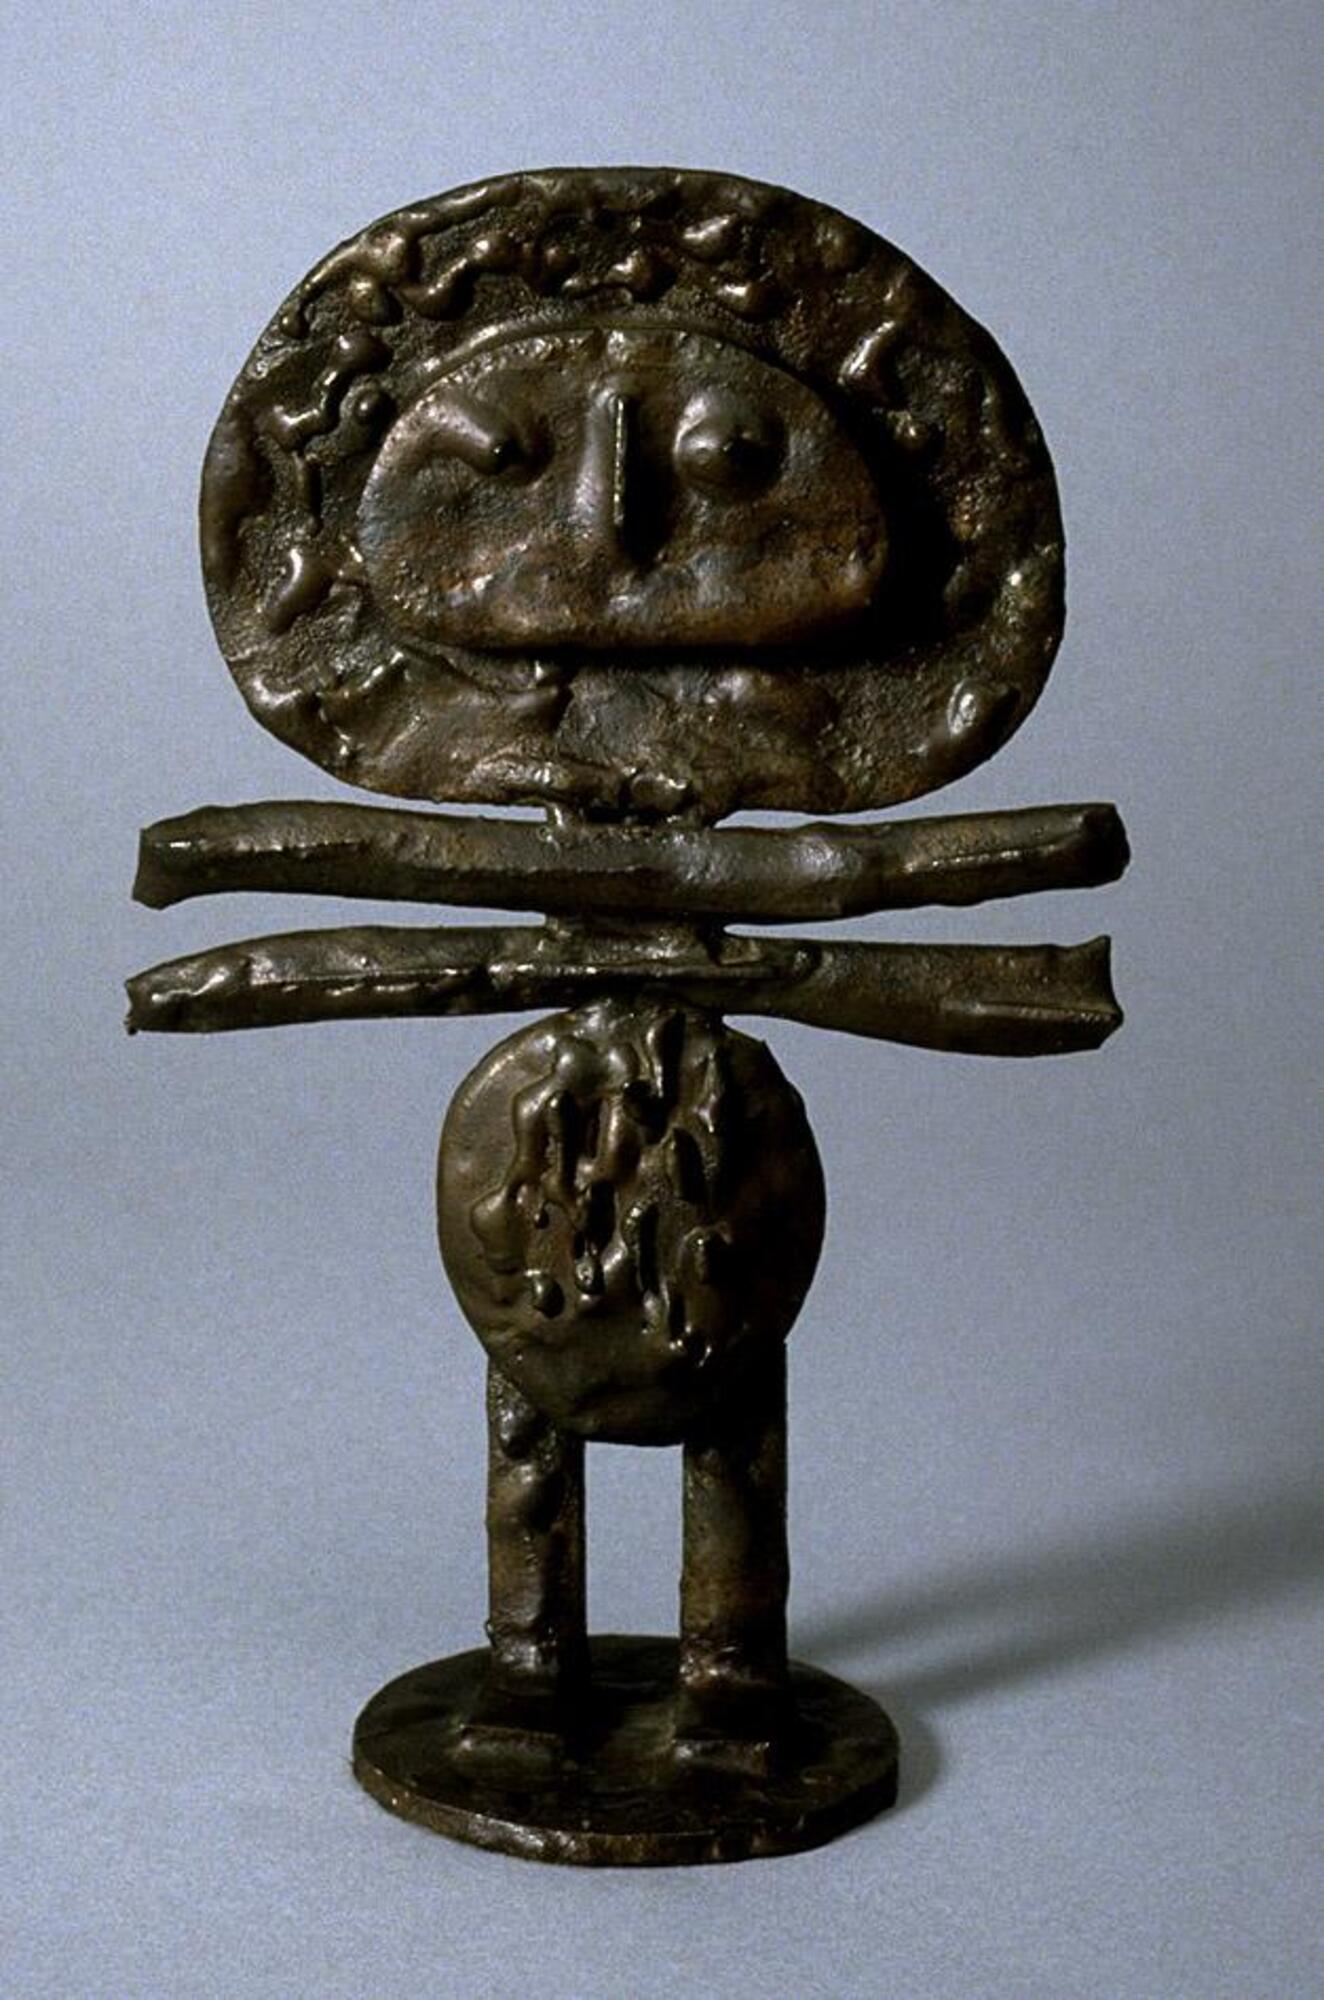 Highly abstracted figure with oval body, short straight legs, and a large mushroom shaped head with a crude, wide-mouthed face. Between the body and head are two horizontal bars that are slightly longer than the width of the head. The sculpture is quite flat, and the bronze has a molten look.